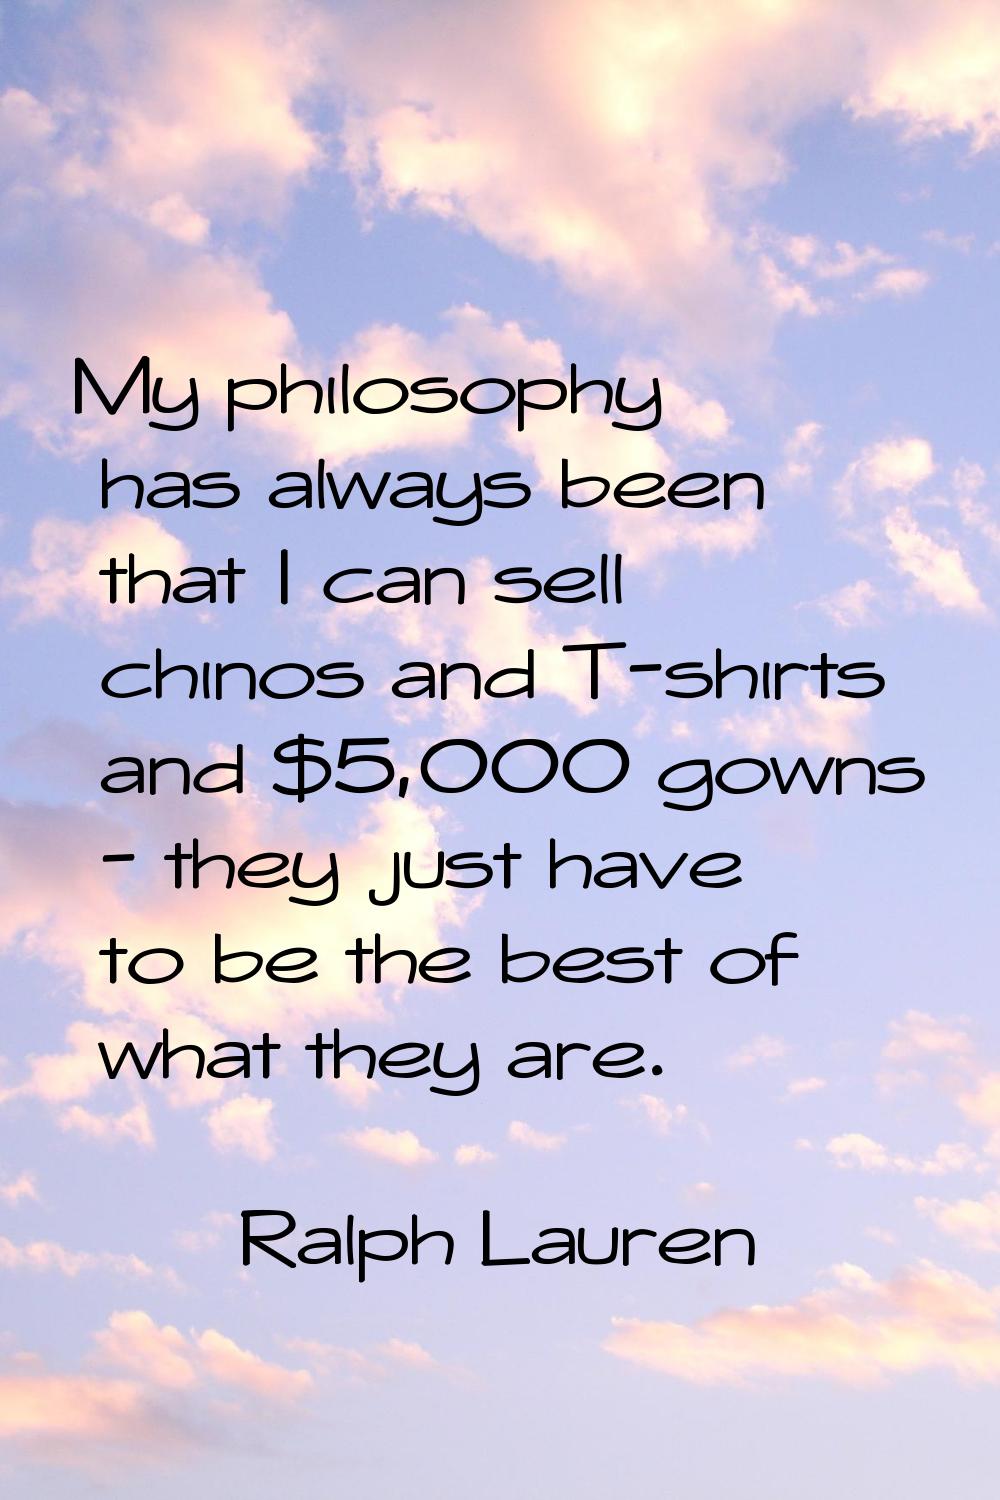 My philosophy has always been that I can sell chinos and T-shirts and $5,000 gowns - they just have